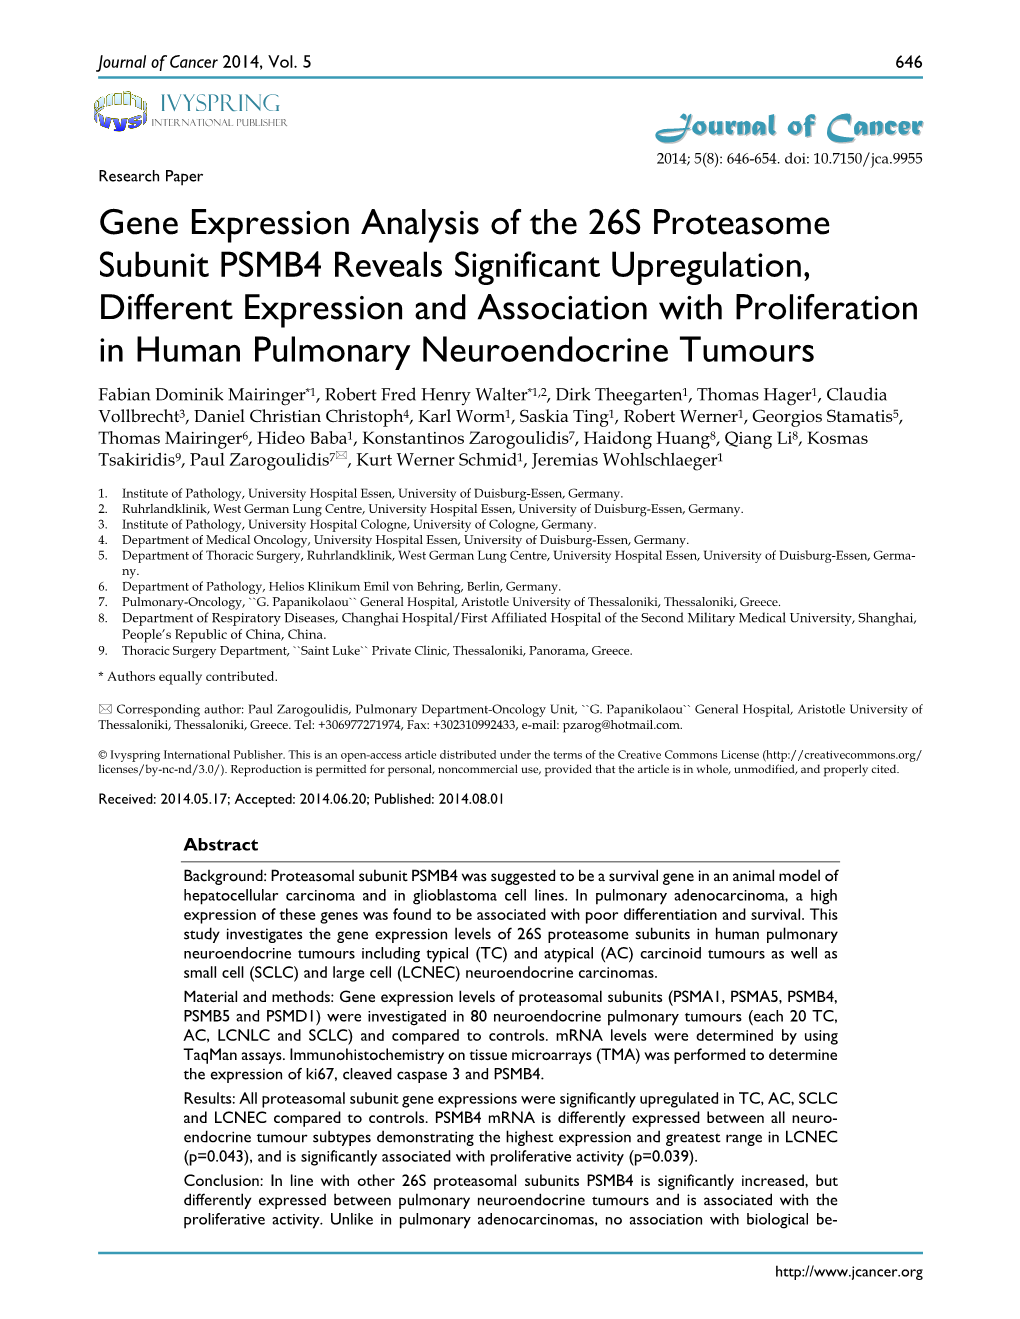 Gene Expression Analysis of the 26S Proteasome Subunit PSMB4